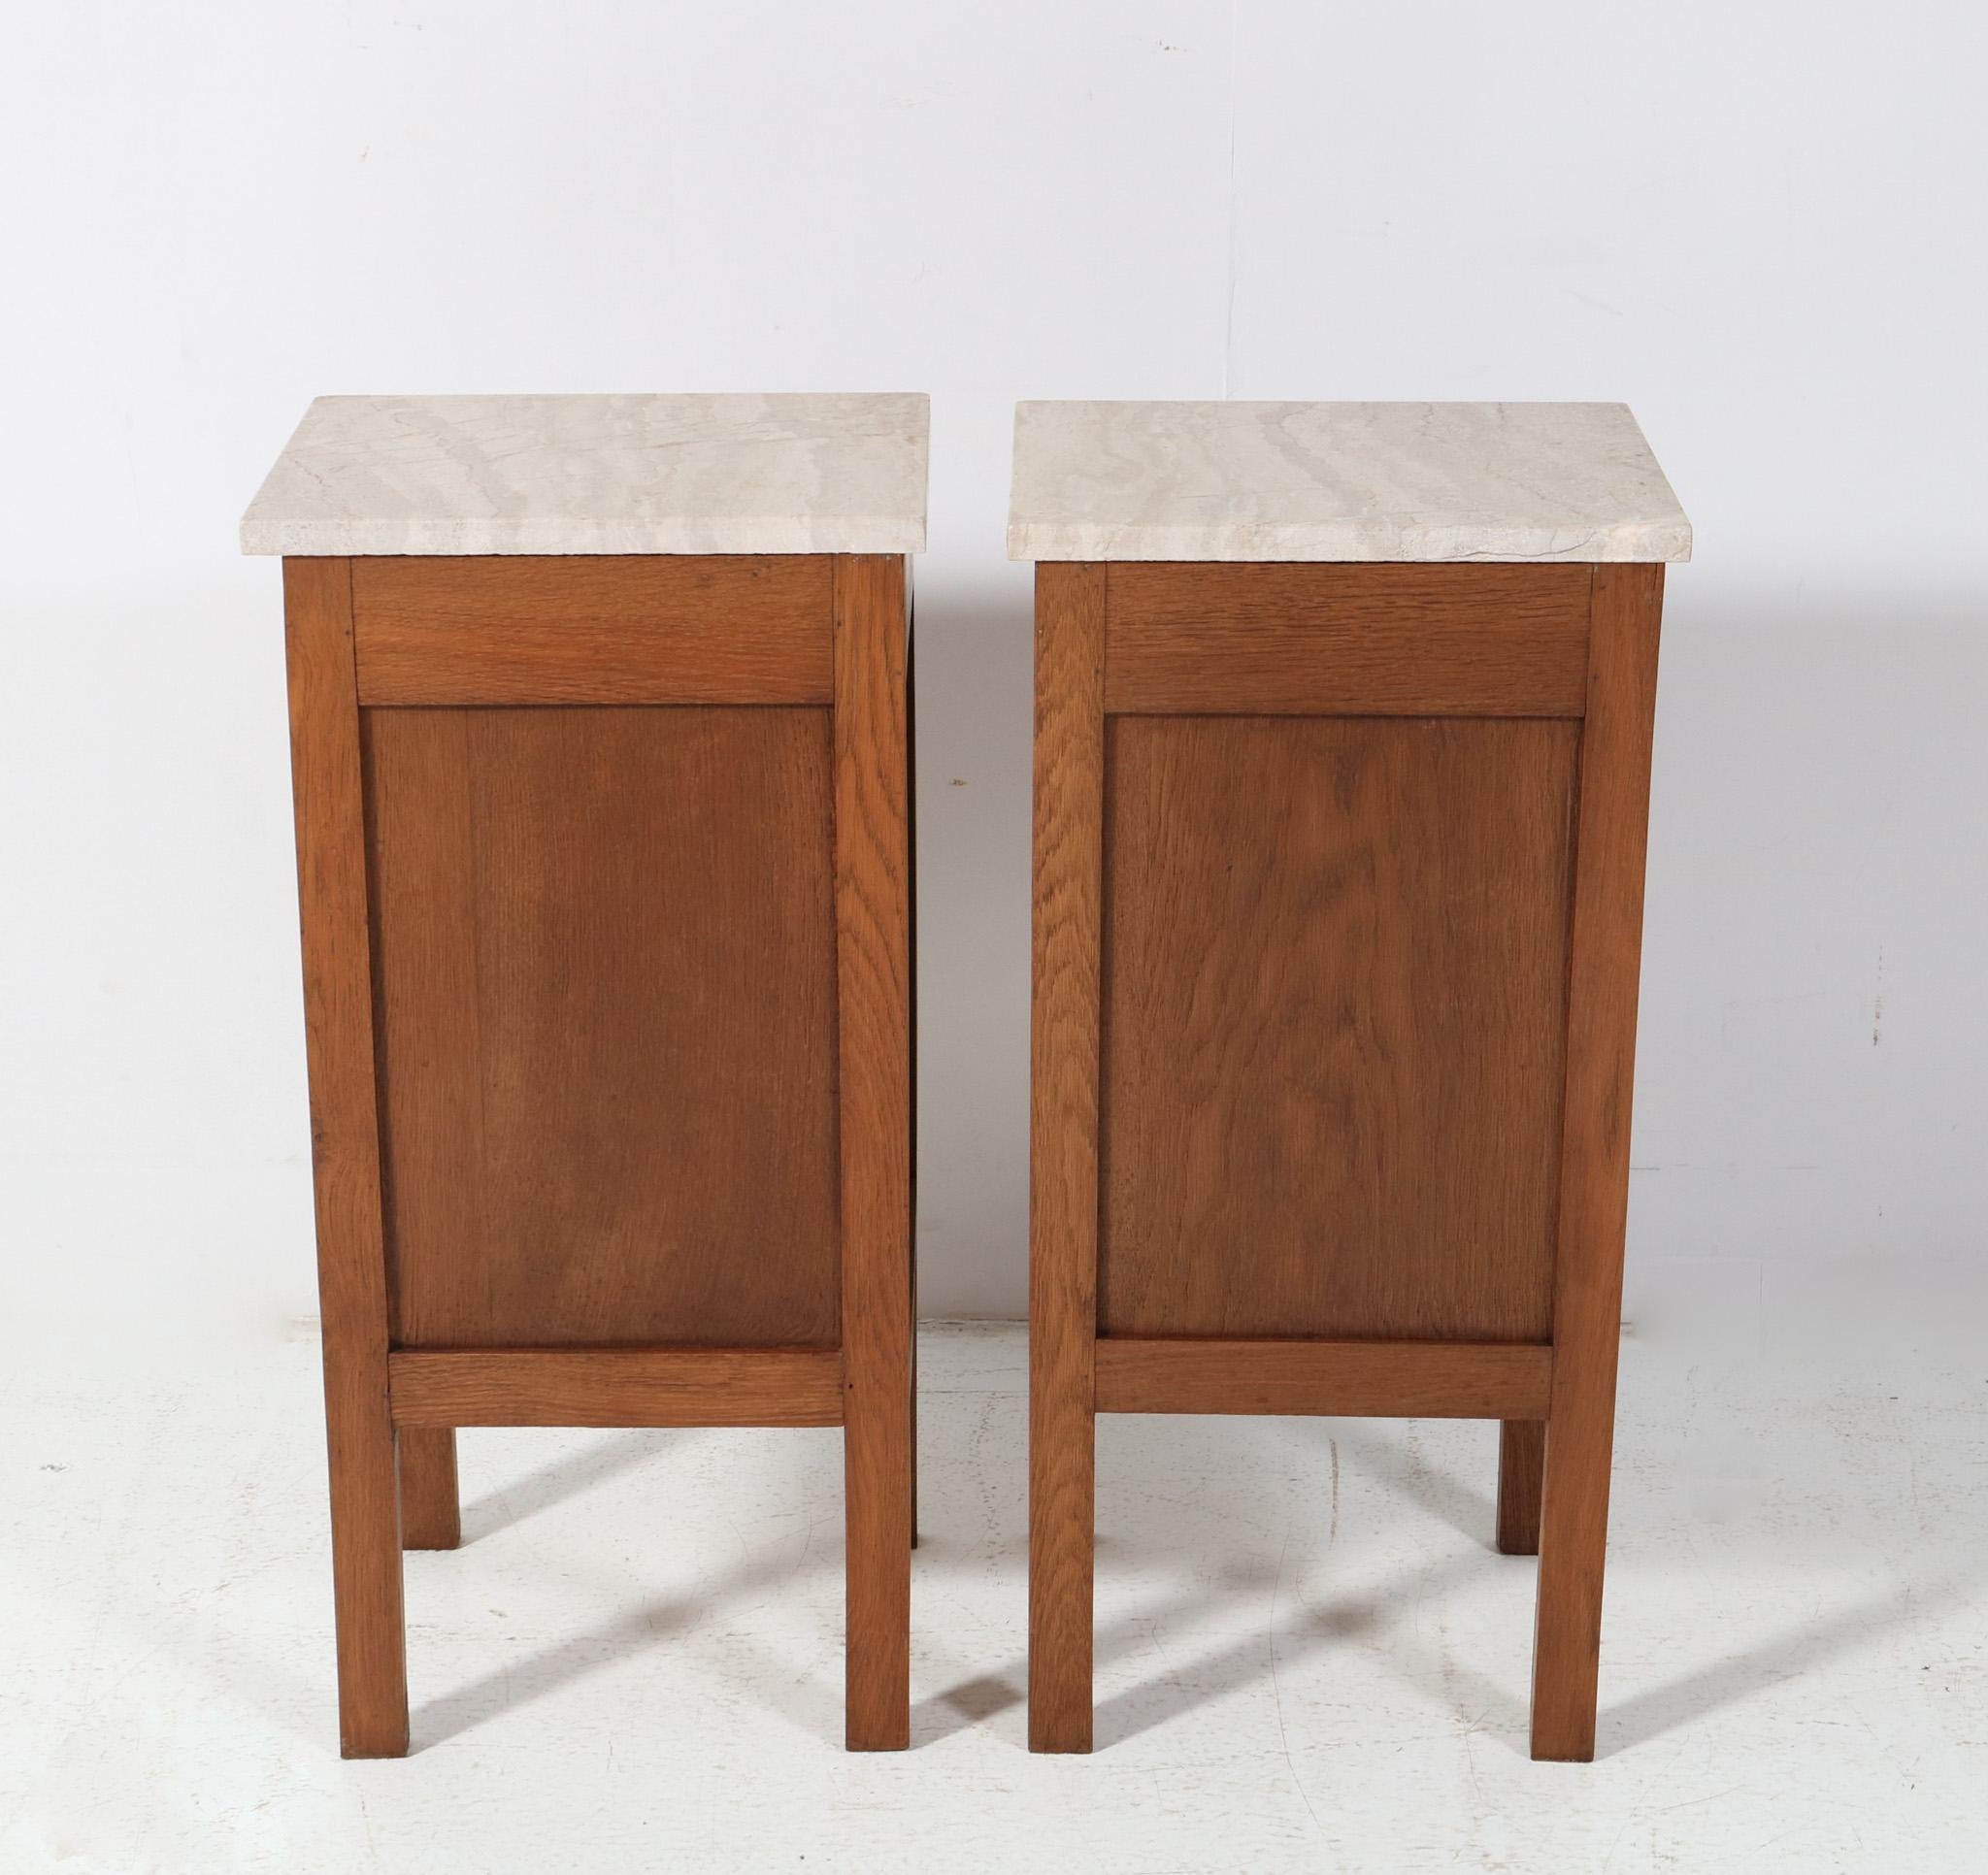 Two Oak Arts & Crafts Art Nouveau Nightstands or Bedside Tables, 1900s For Sale 2